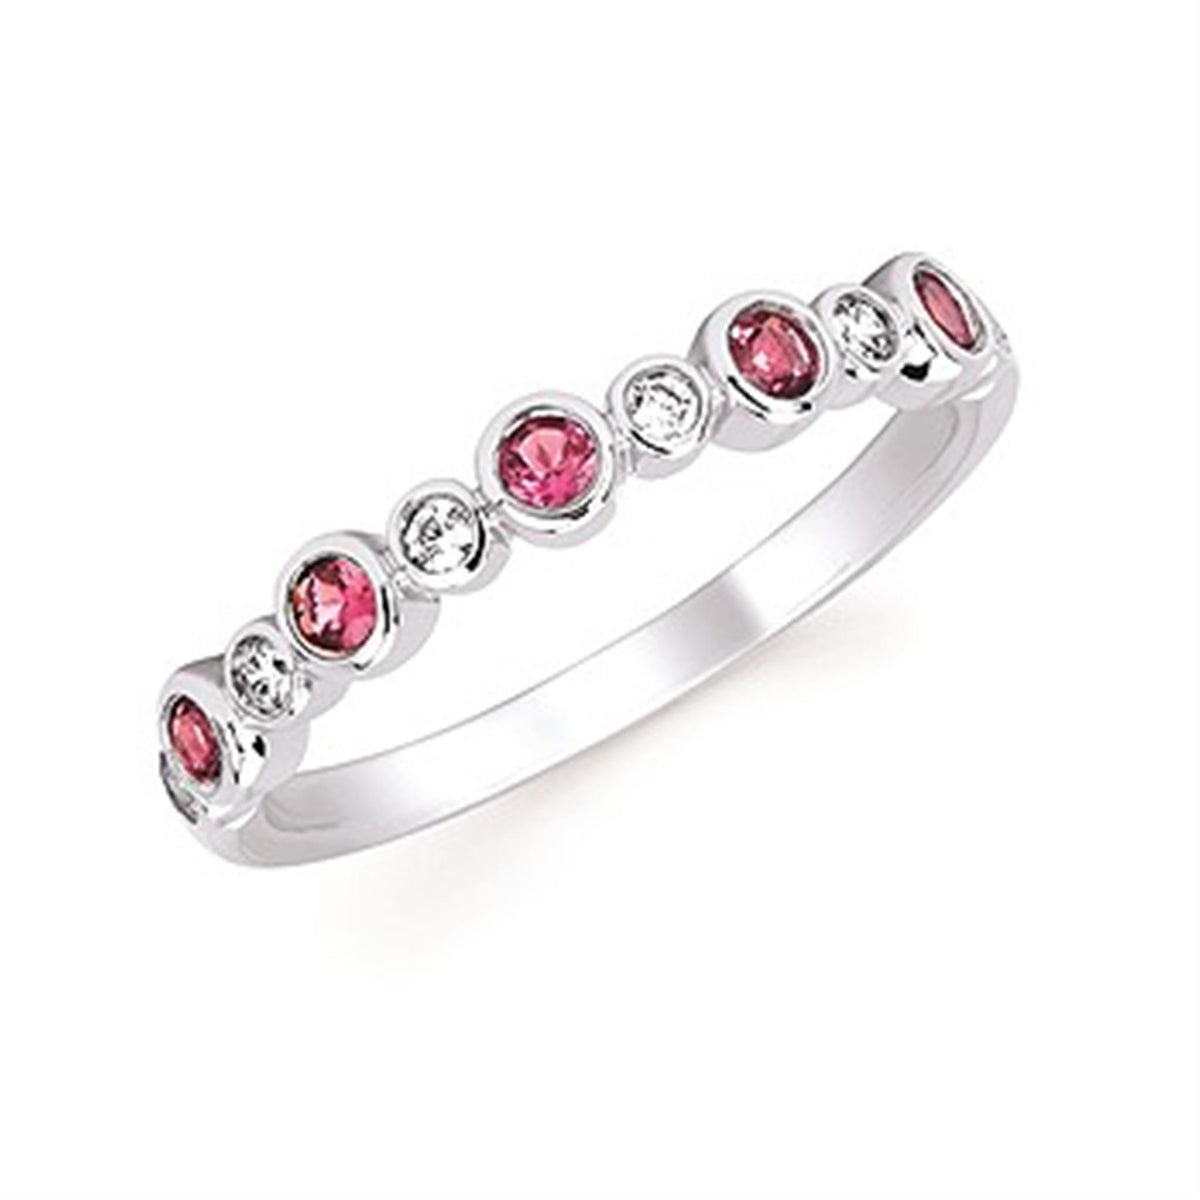 14Kt White Gold Stackable Gemstone Ring With PinkTourmalines